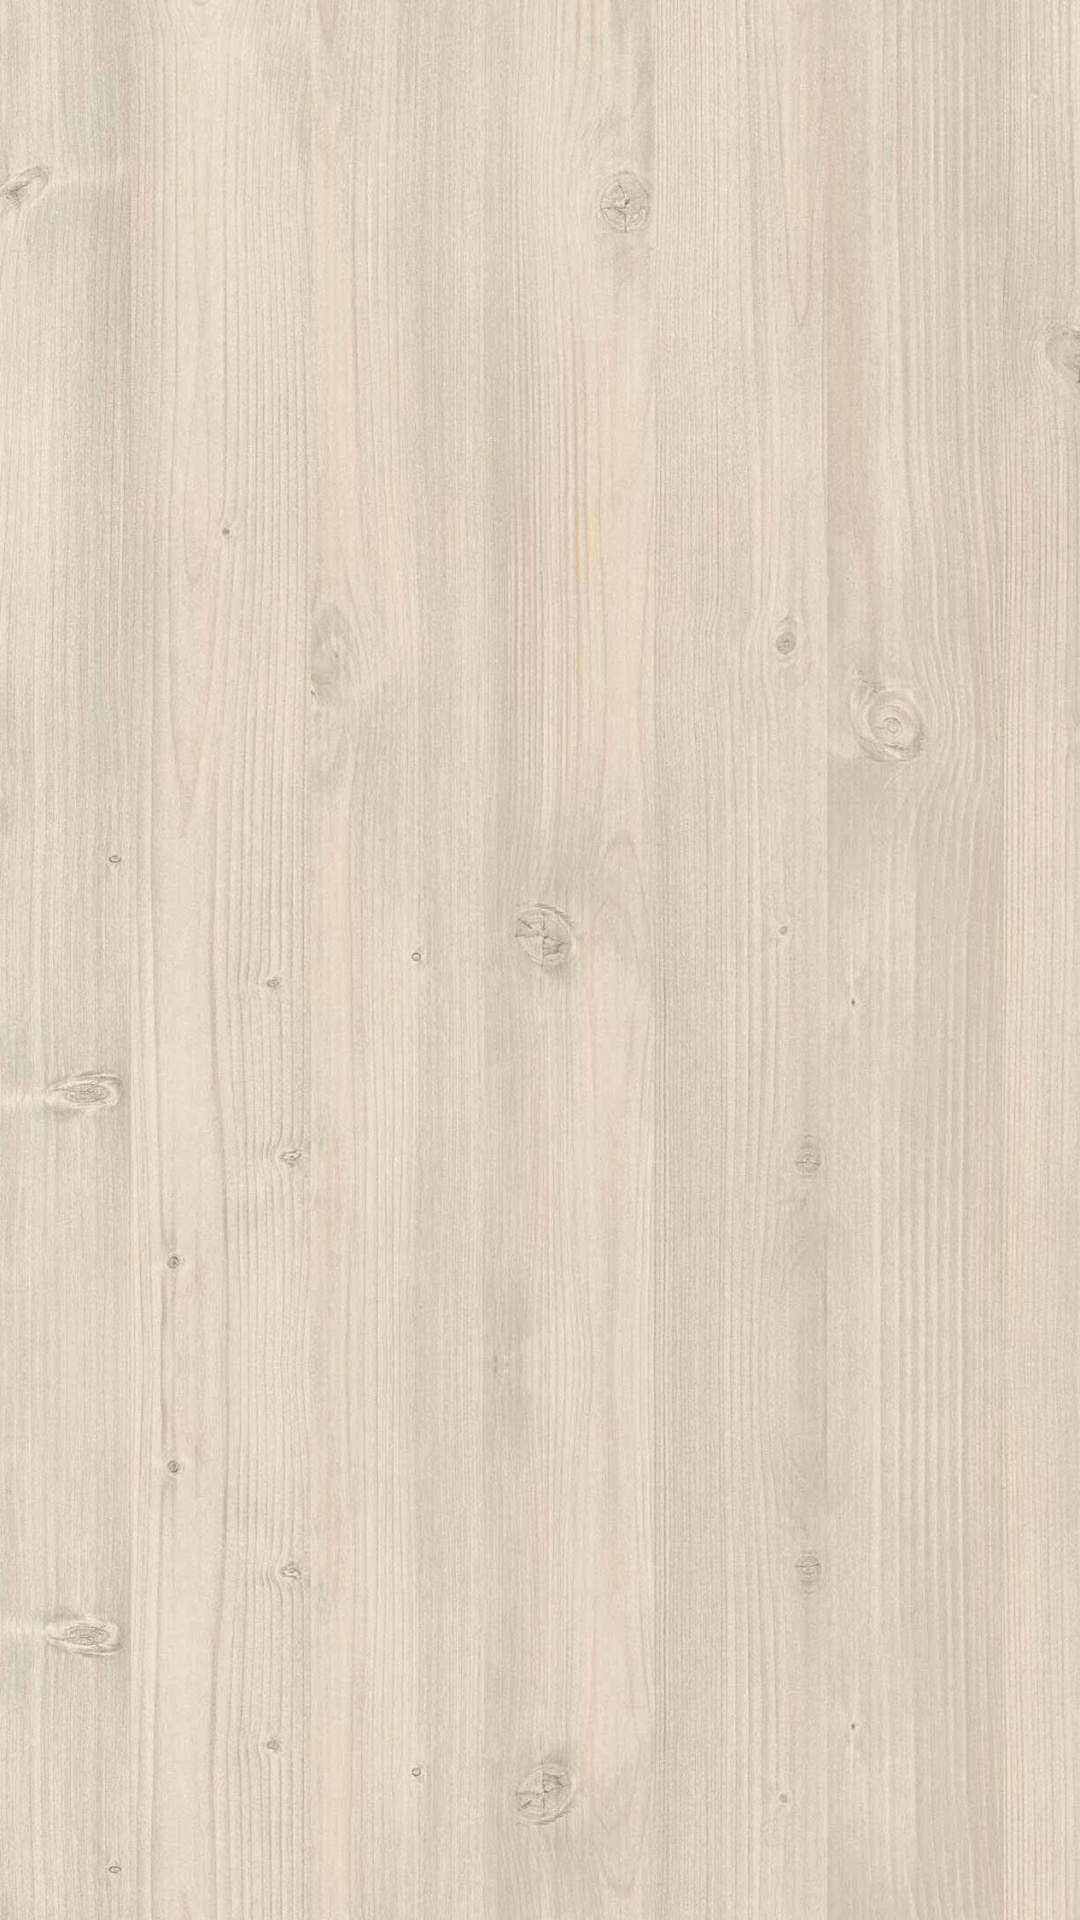 White and Brown Wooden Surface. Wallpaper in 1080x1920 Resolution